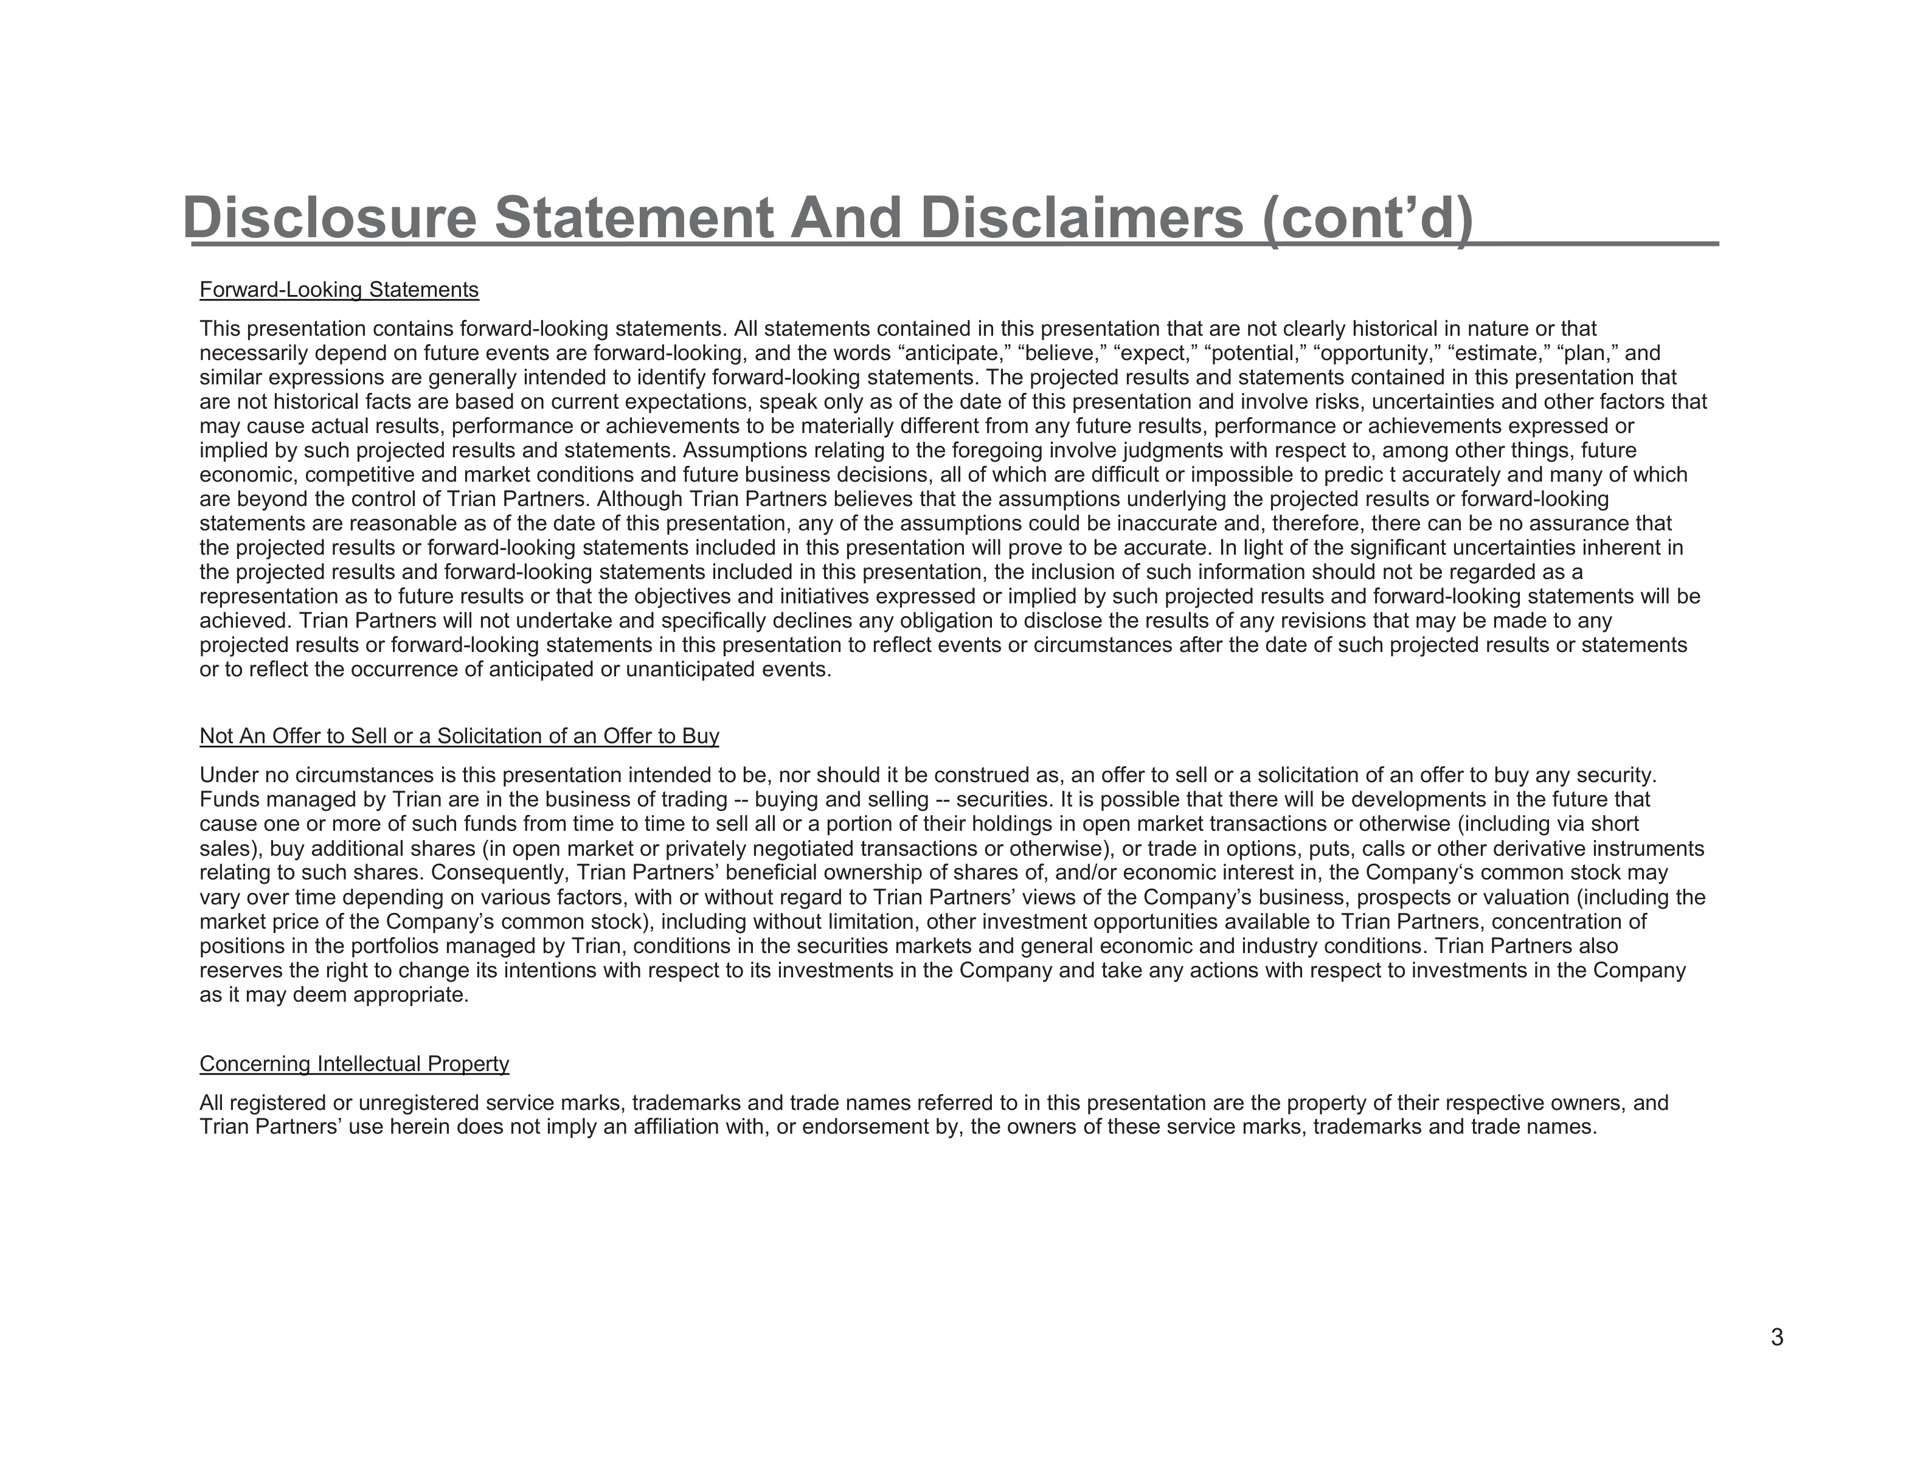 disclosure statement and disclaimers | Trian Partners